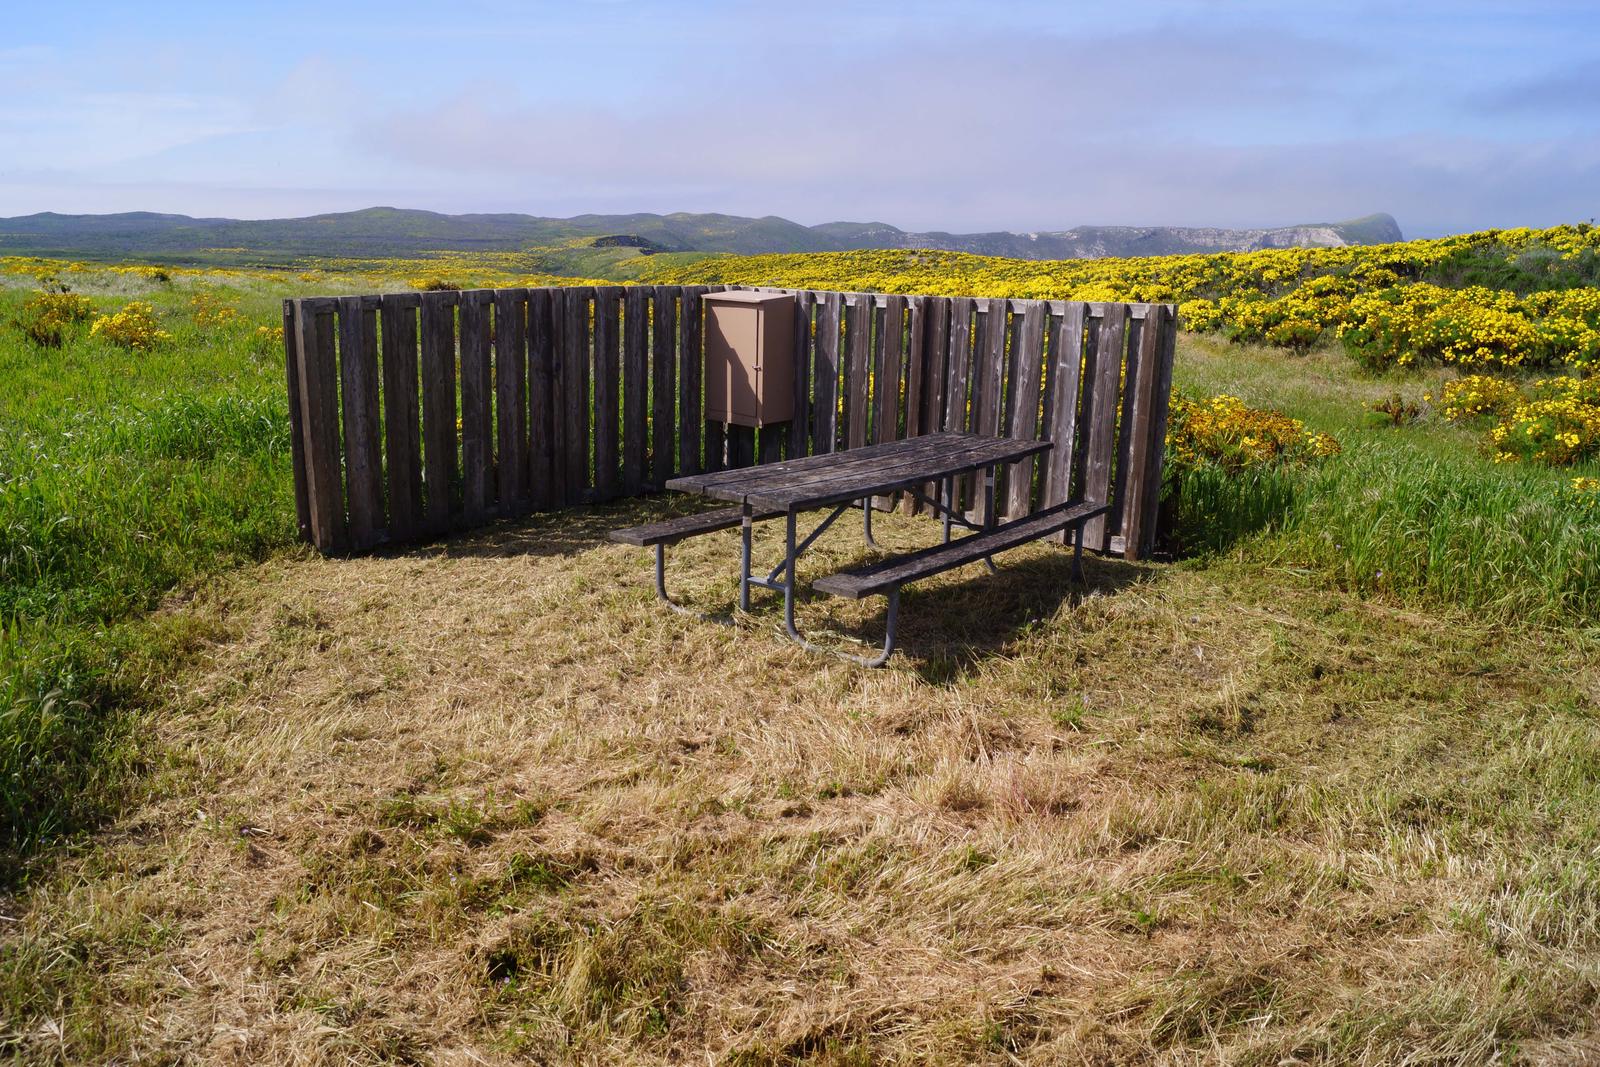 Picnic table and windbreak surrounded by grass and yellow flowered plant. SAN MIGUEL ISLAND AREA - 006
